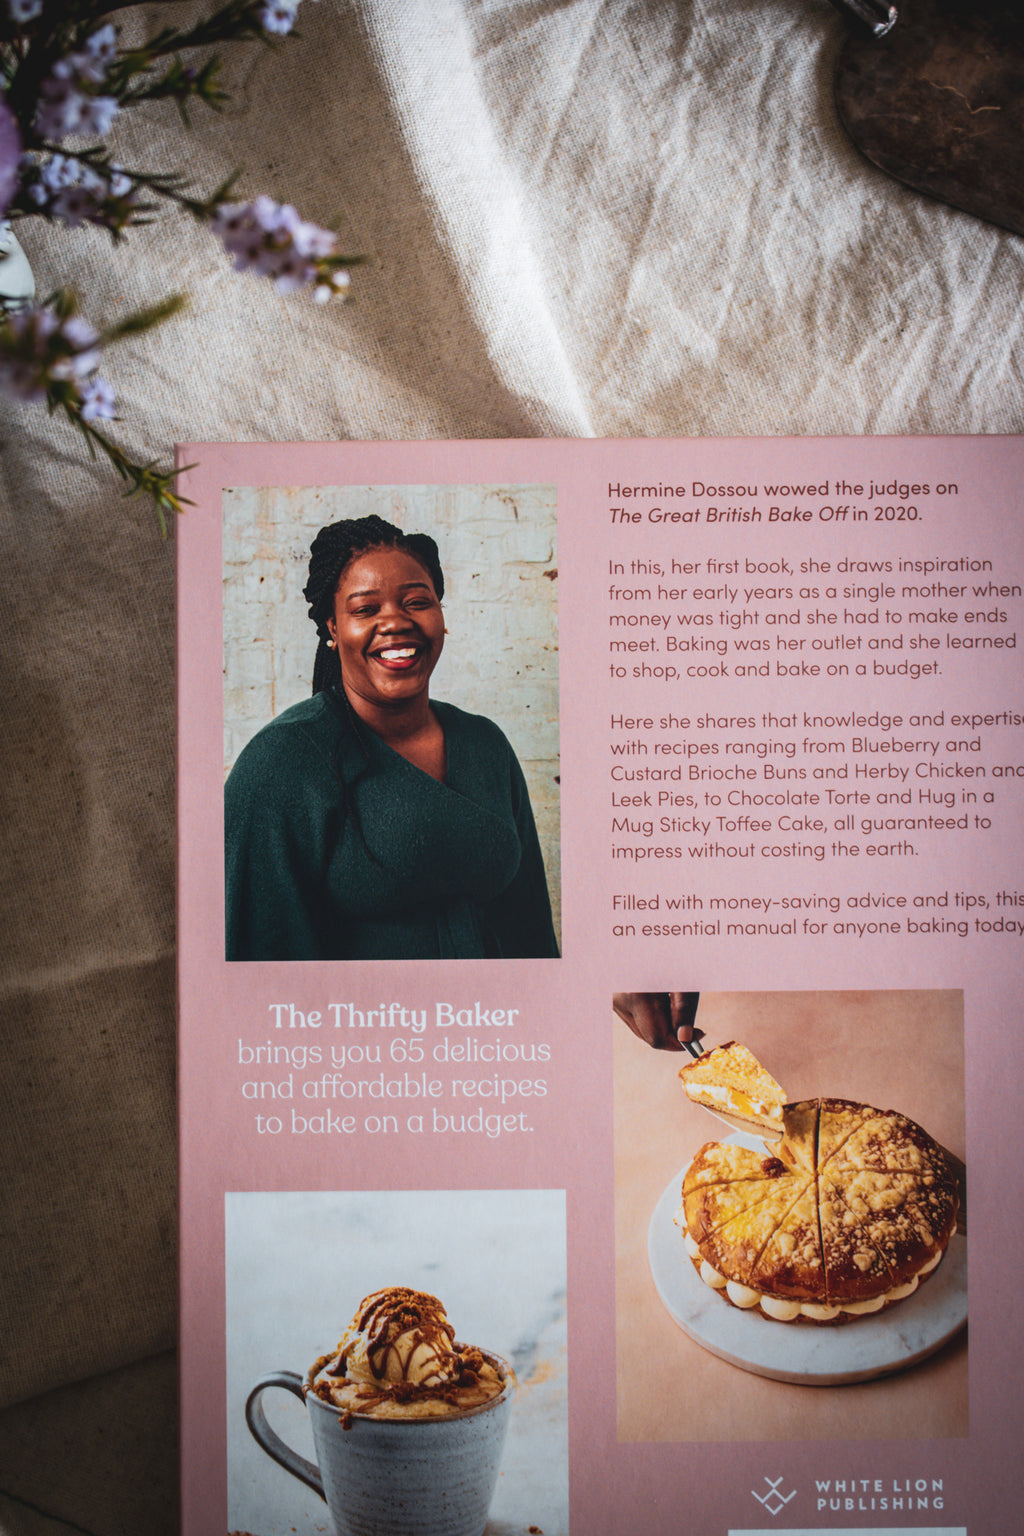 The Thrifty Baker: Shop, Bake & Eat on a Budget